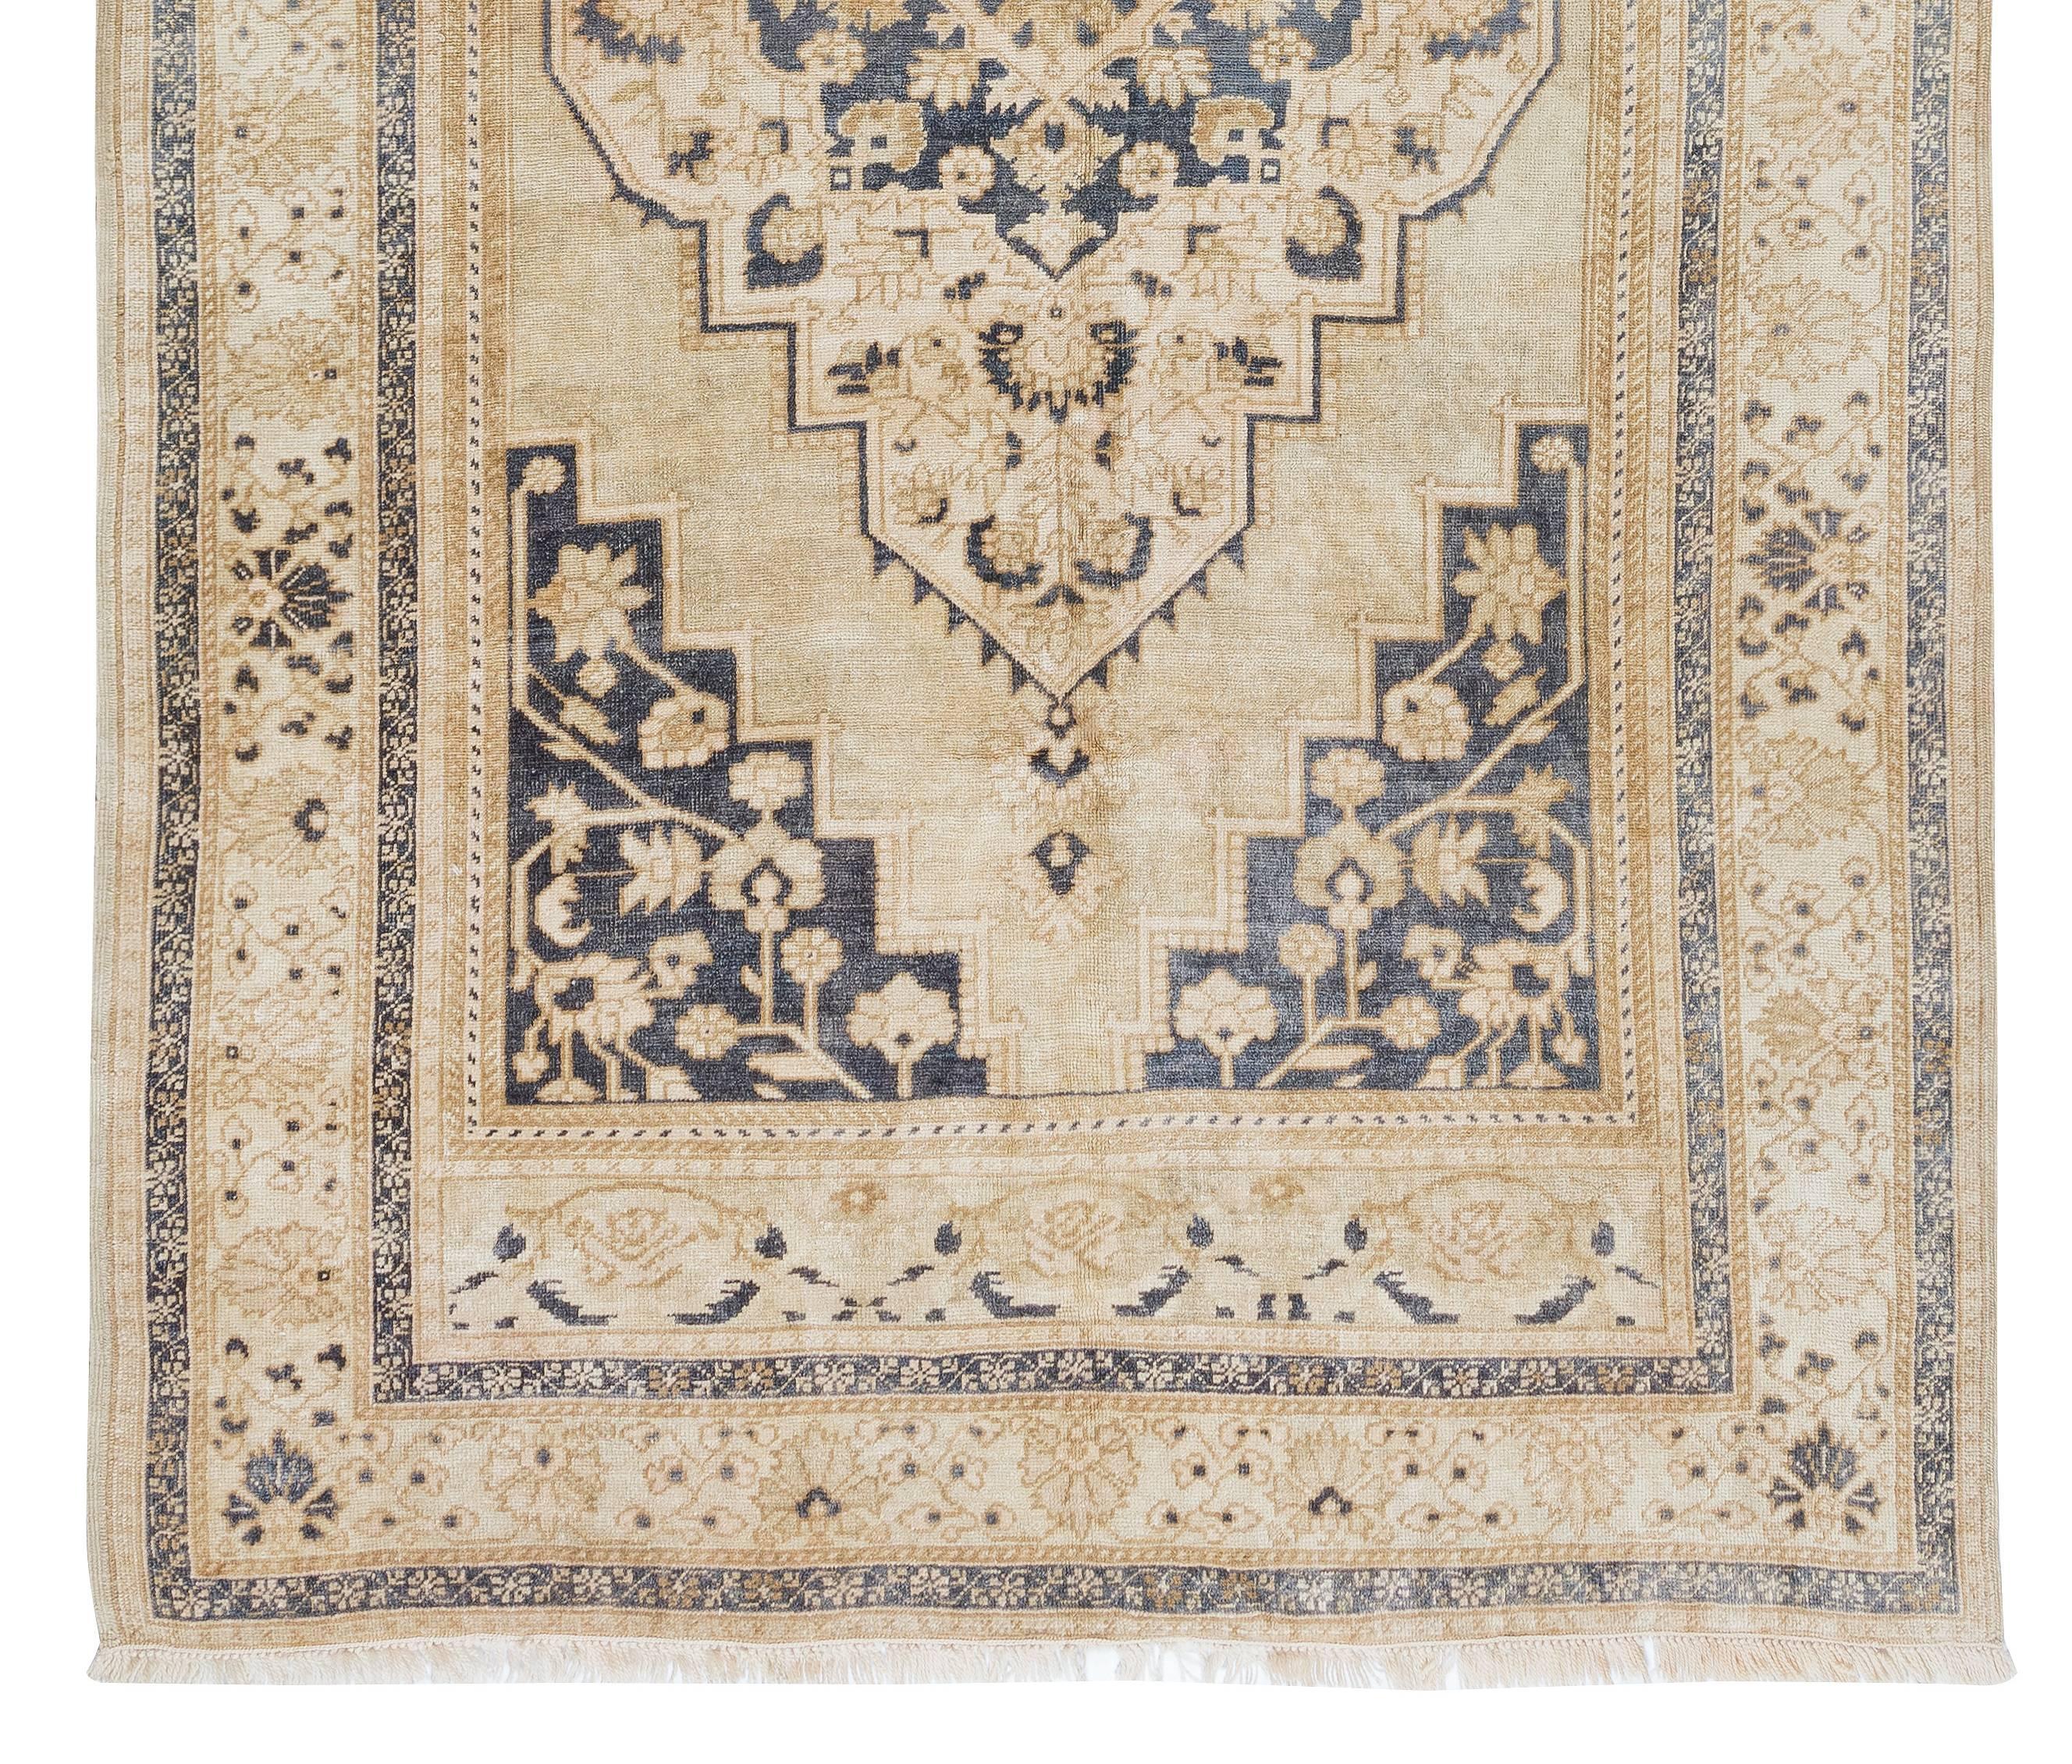 20th Century 5.4x9.3 Ft 1960s Hand Knotted Turkish Oushak Rug with Geometric Medallion Design For Sale